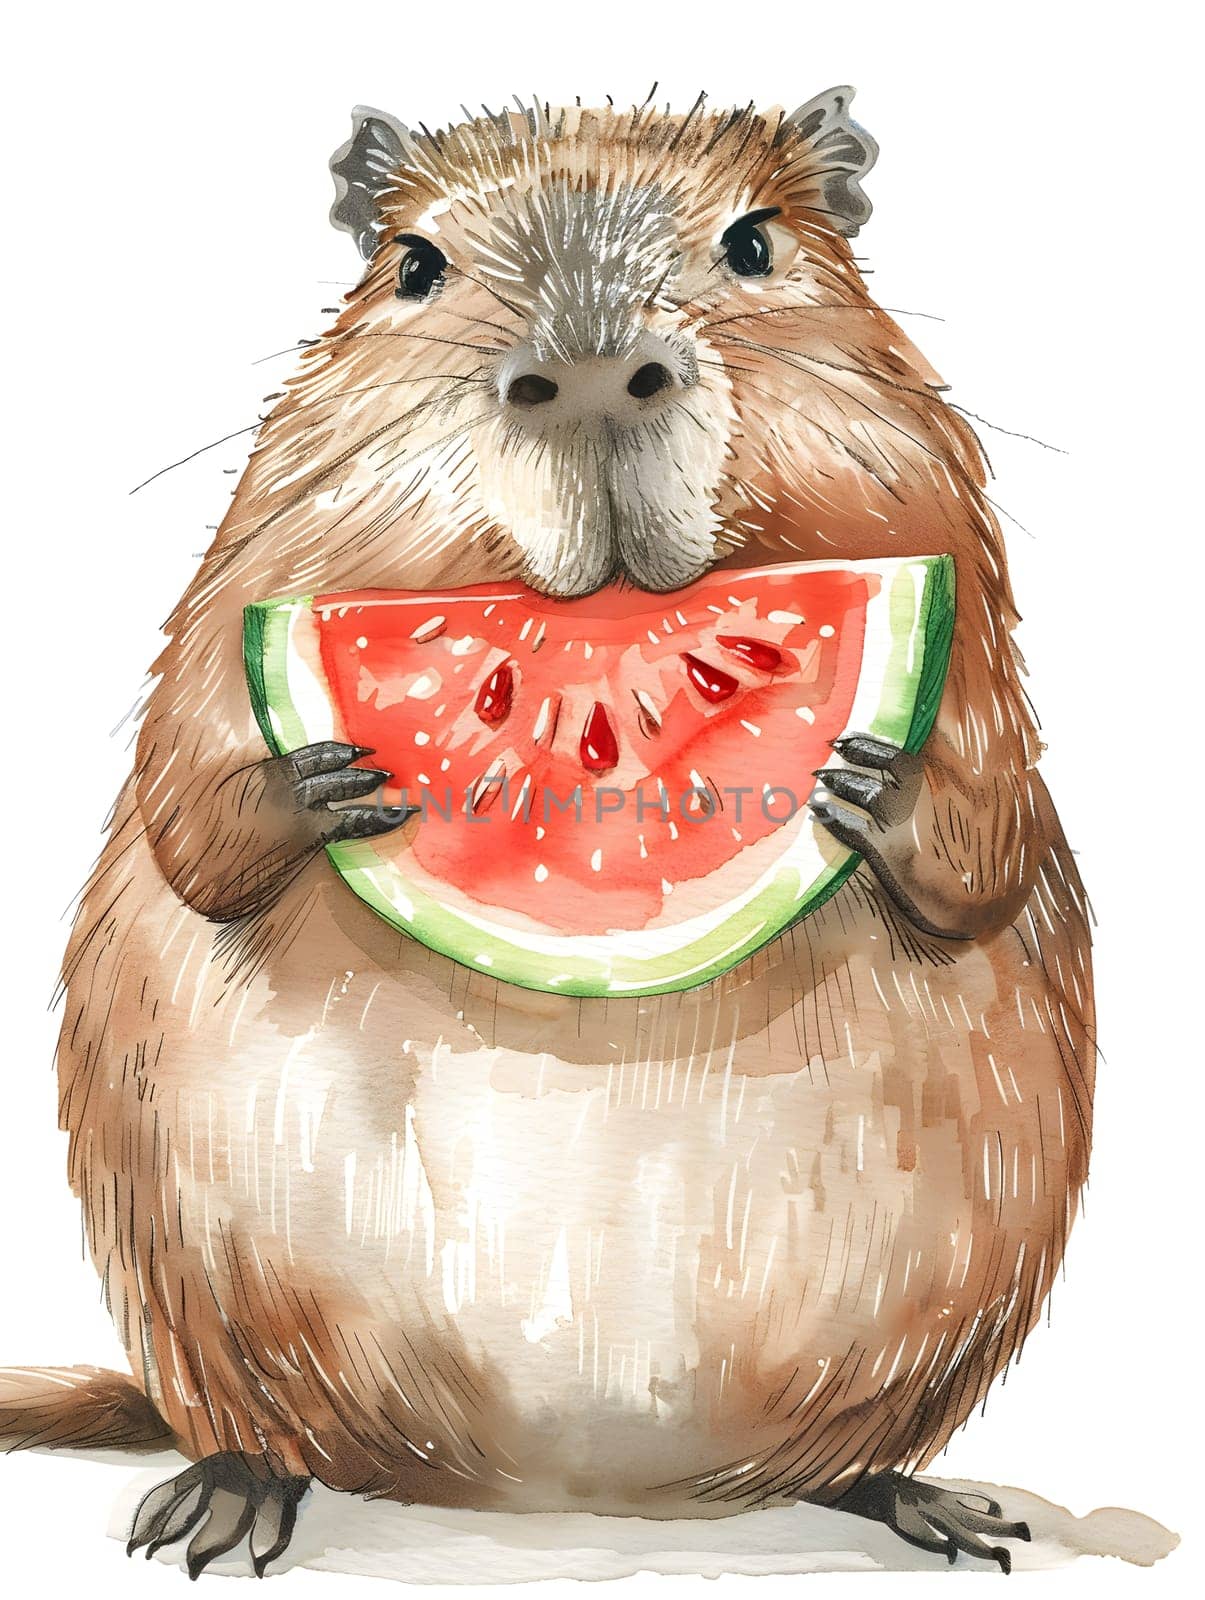 A rodent with whiskers and a snout is enjoying a slice of watermelon, a delicious fruit that can be a comfort food for guinea pigs